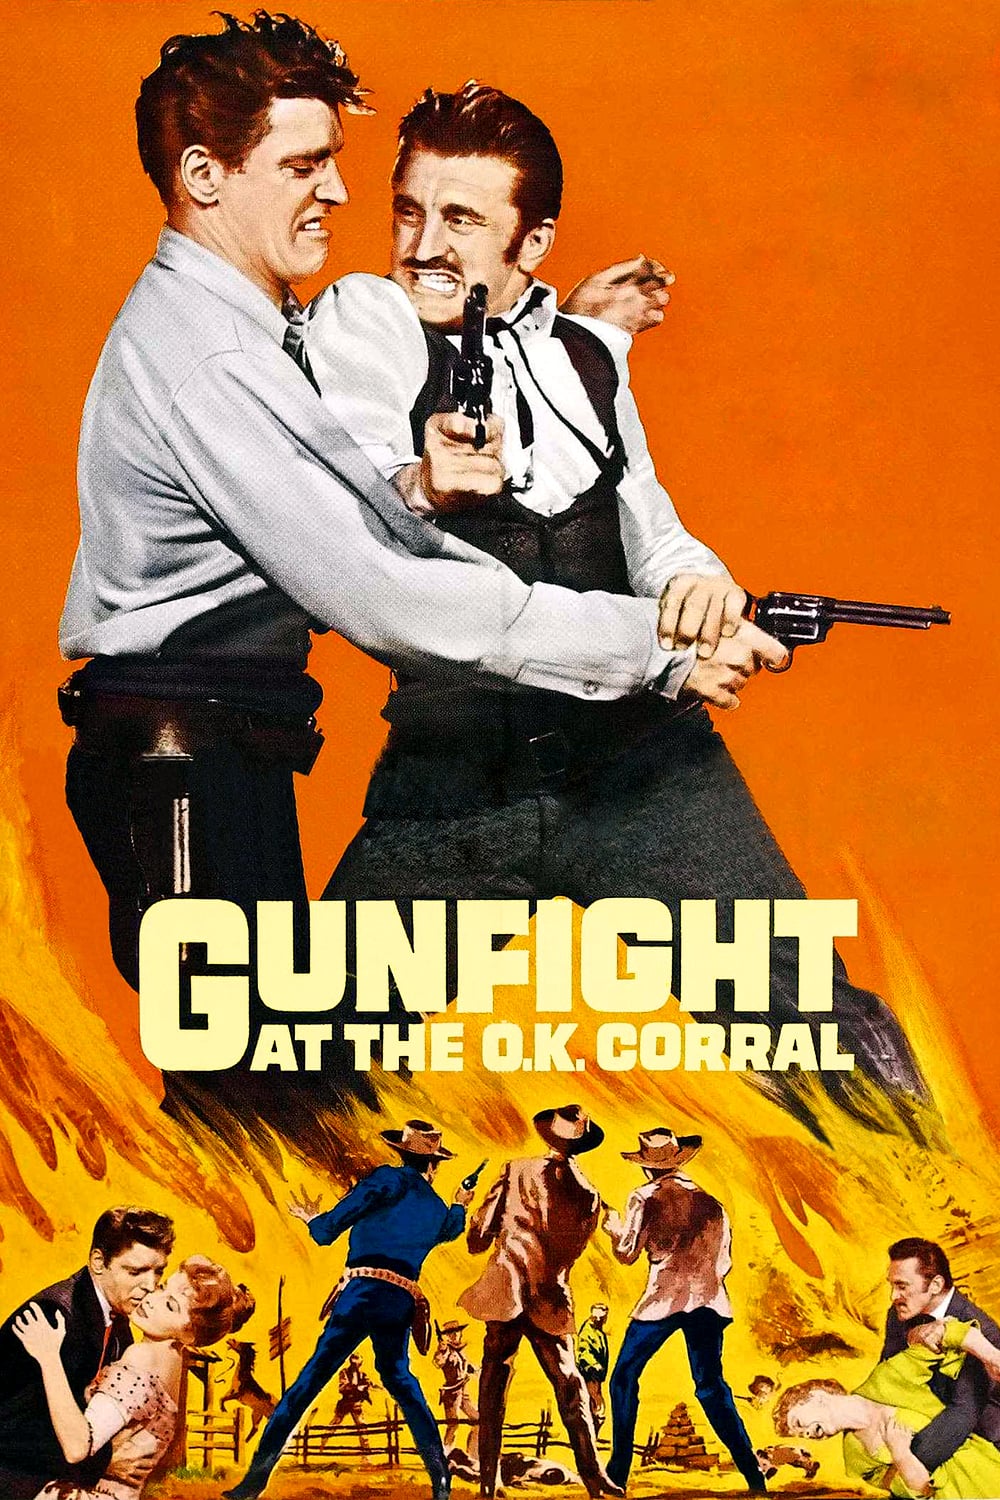 Poster for the movie "Gunfight at the O.K. Corral"